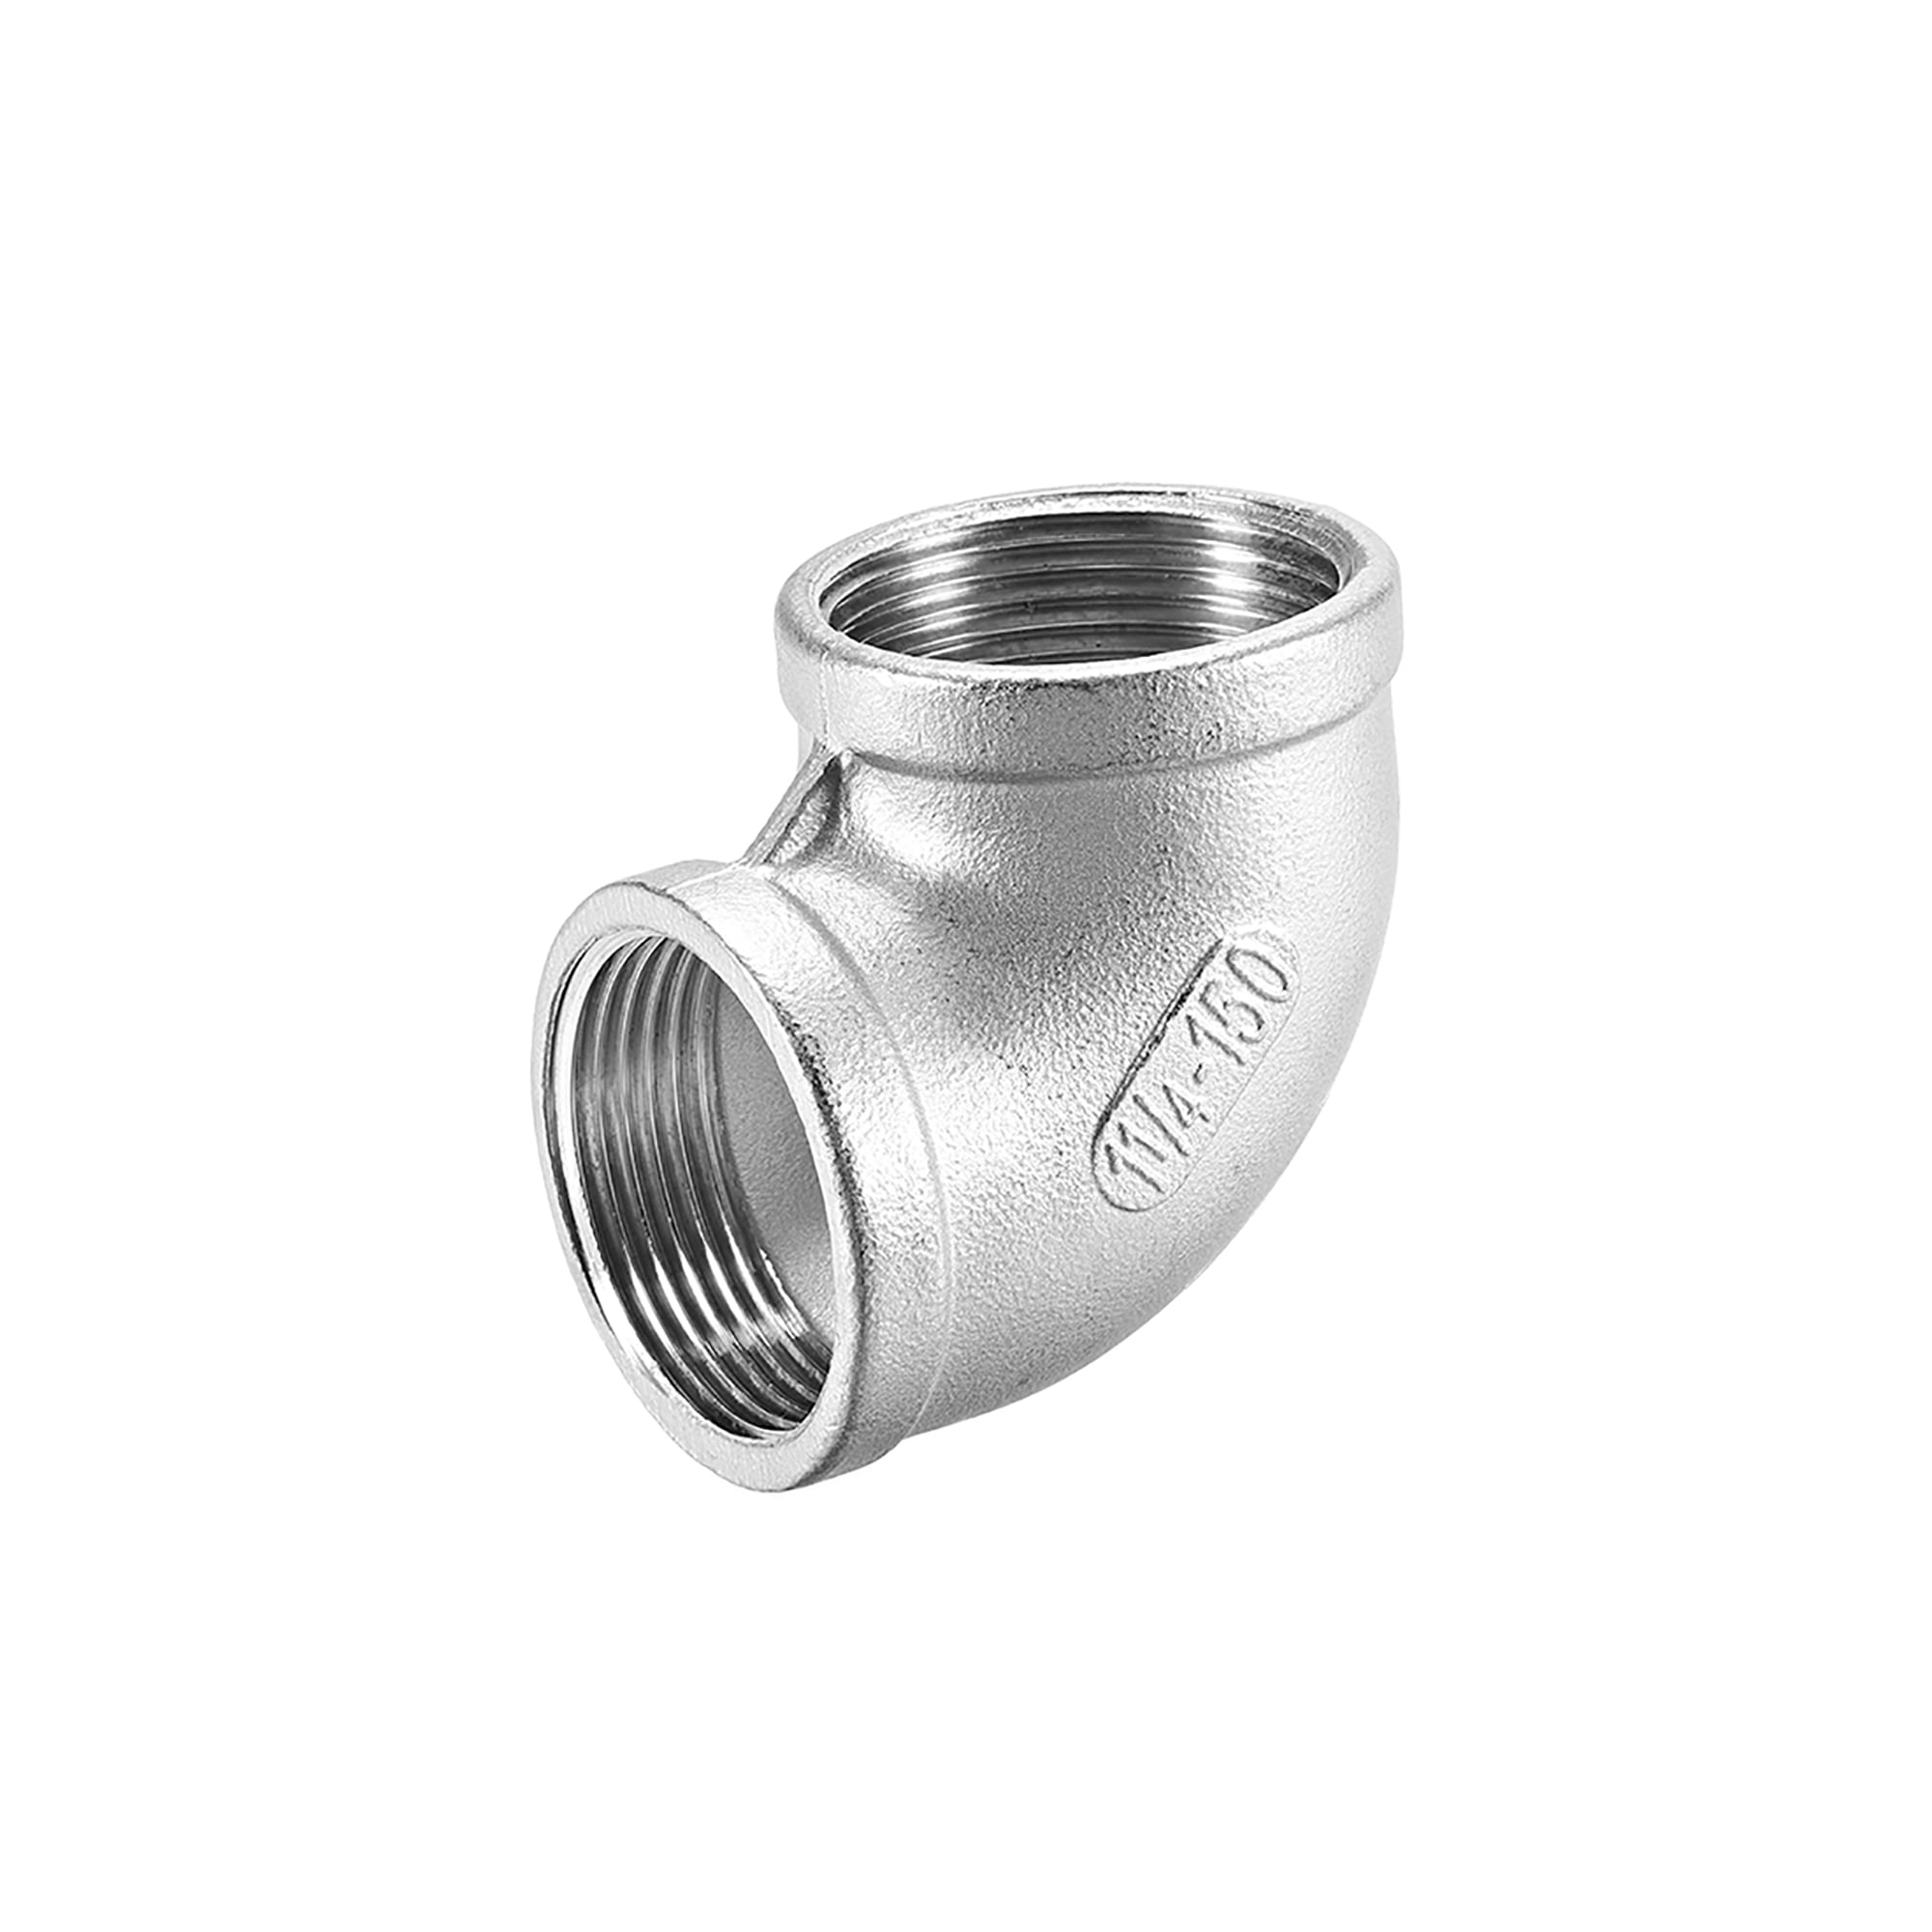 1" Elbow 90 Degree Stainless Steel TC-304 Female Threaded Pipe Fitting NPT 